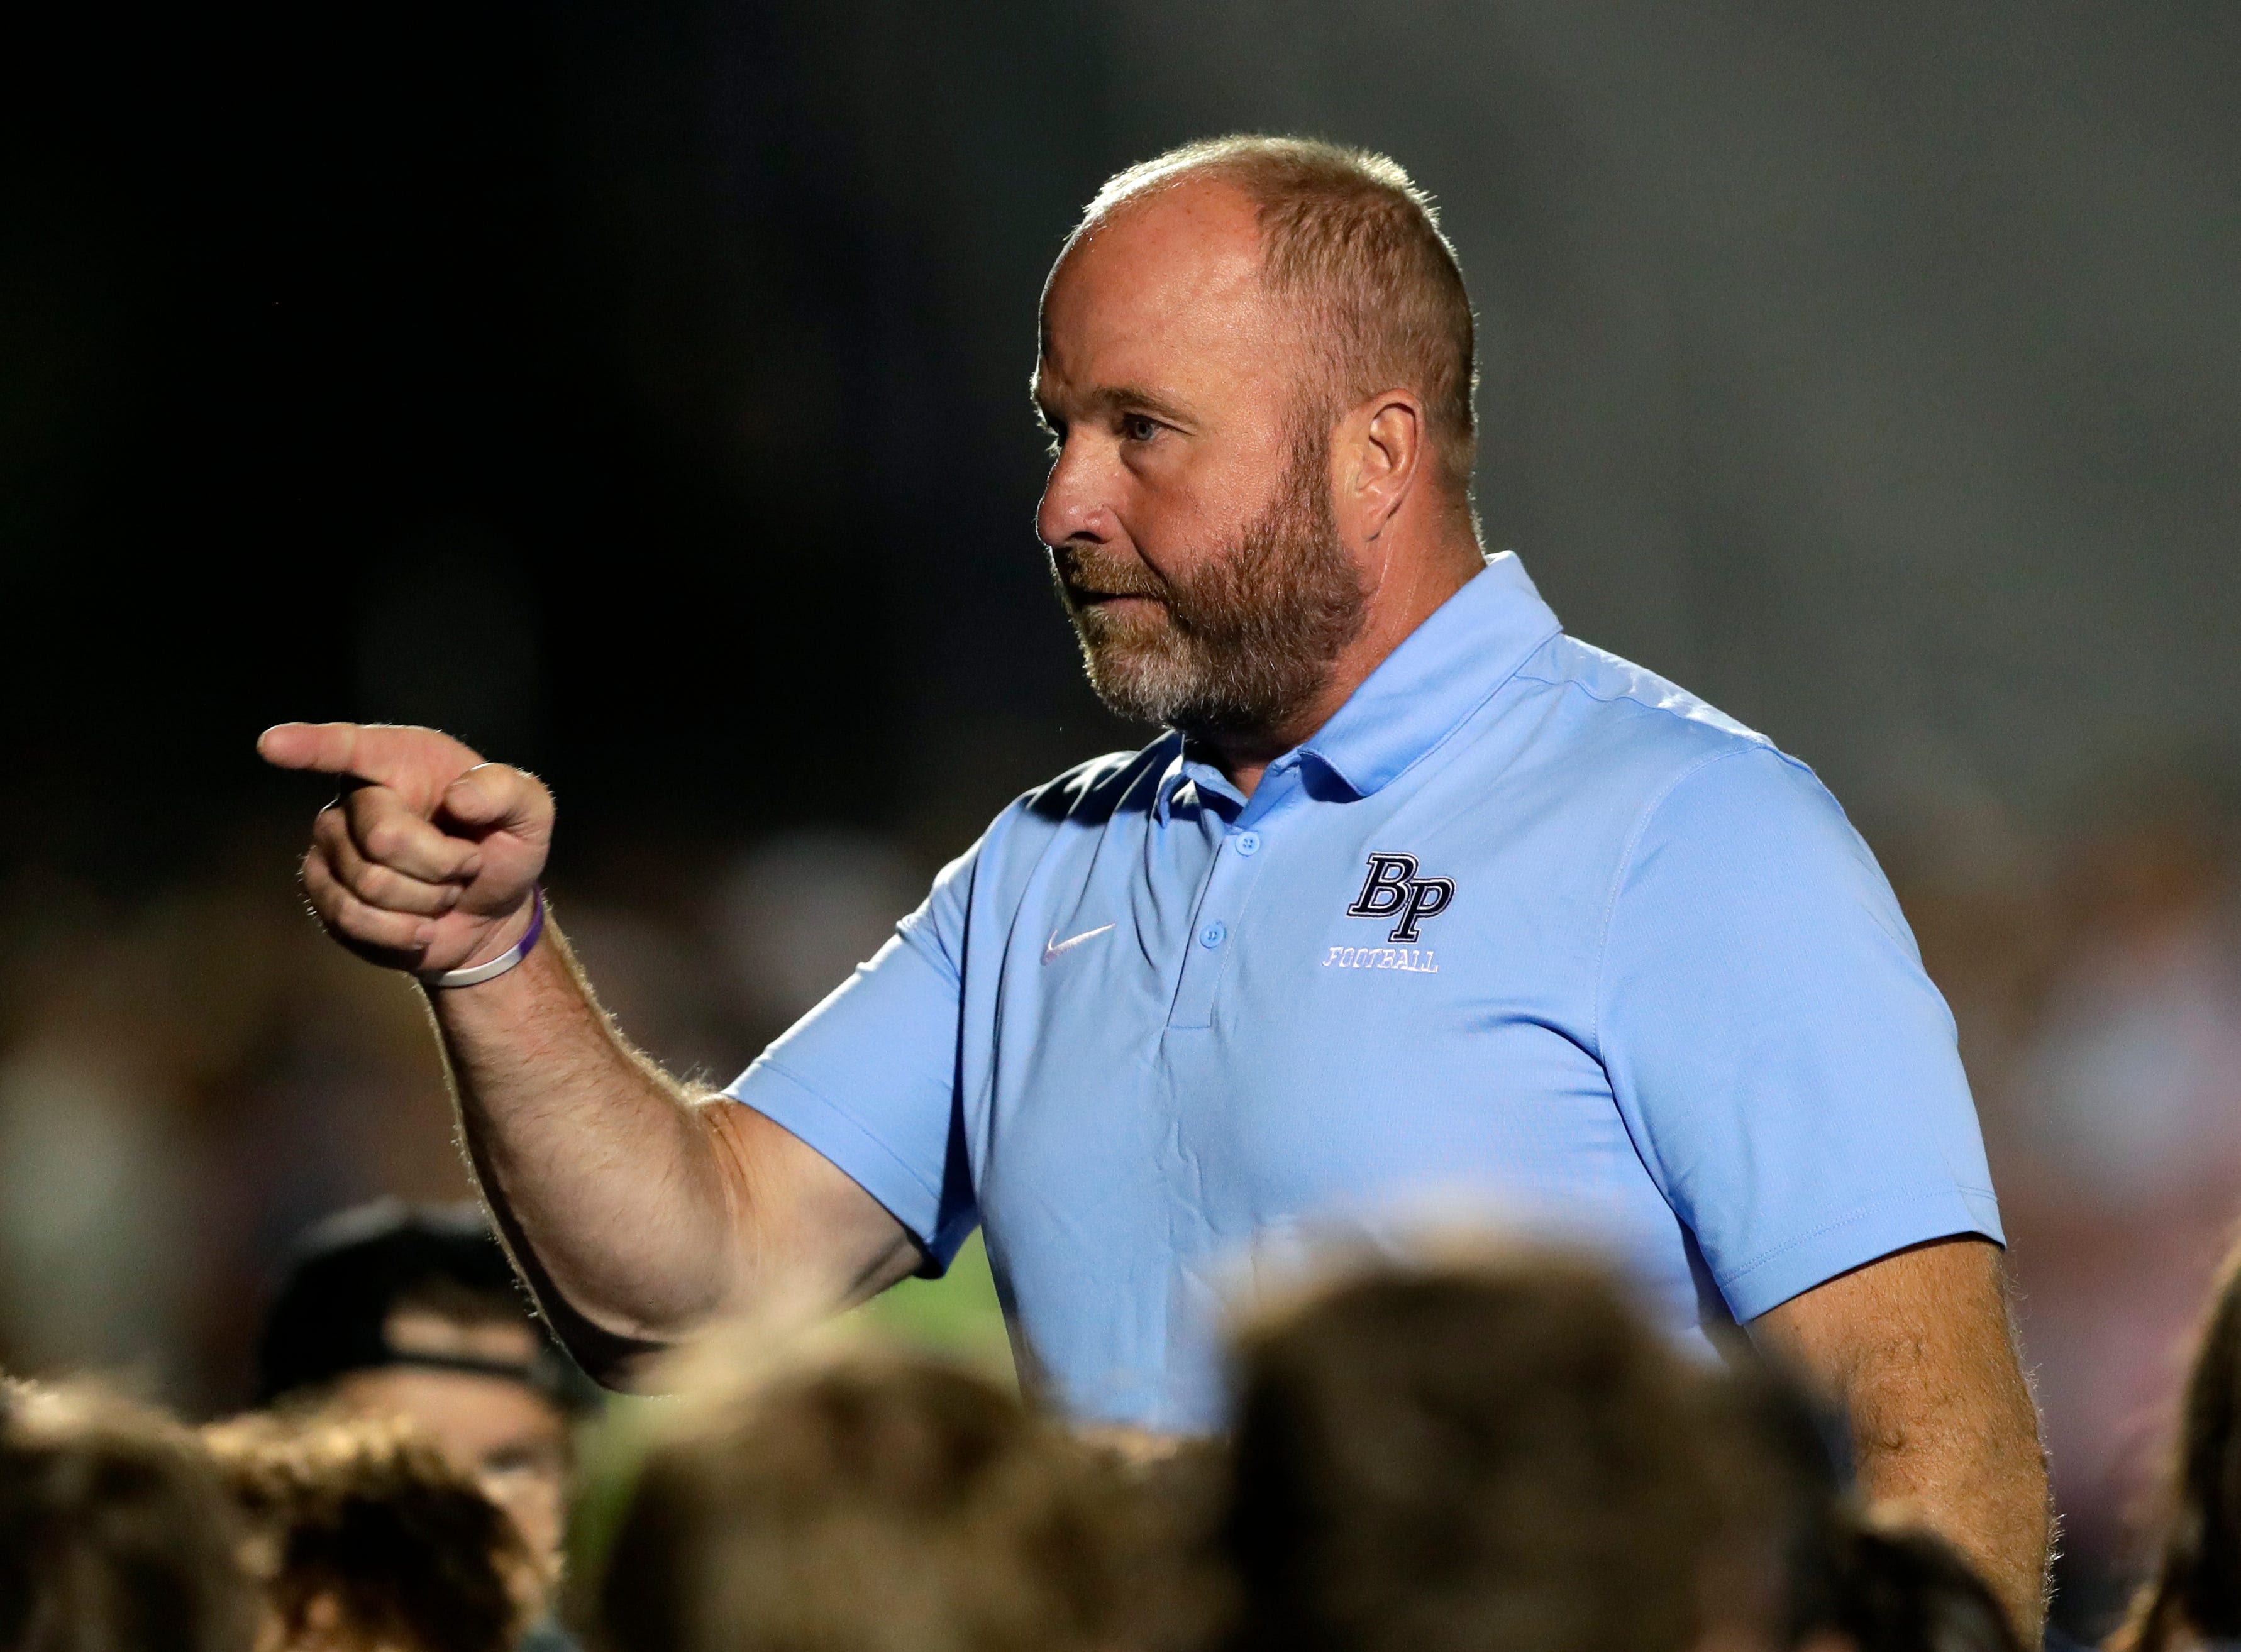 Bay Port's Gary Westerman steps down as football coach after 12 seasons